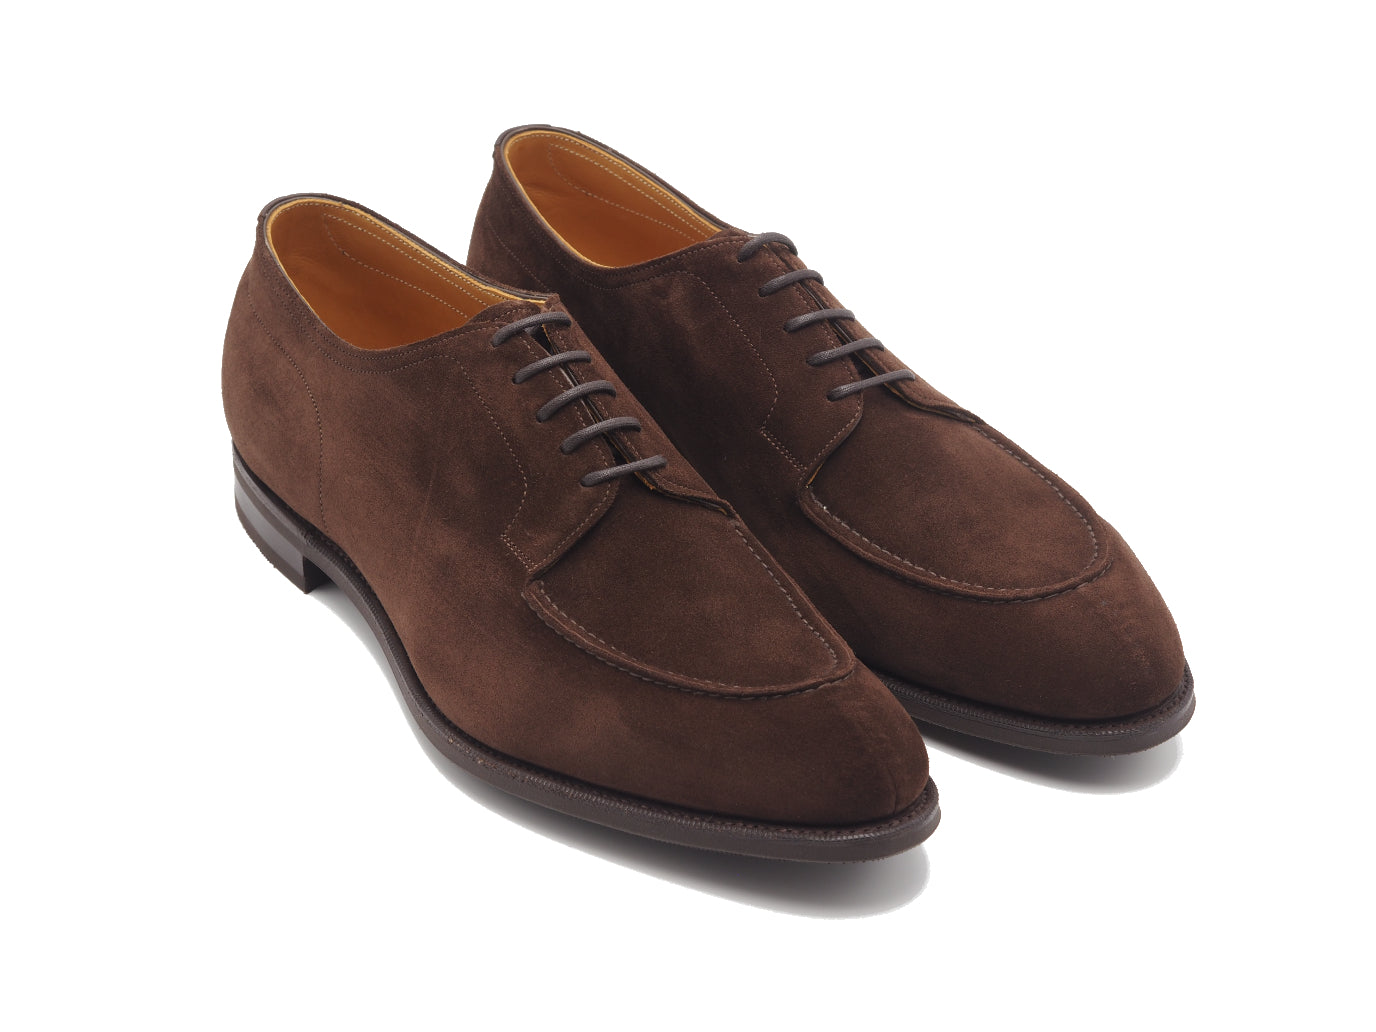 Front angle view of Edward Green unlined Dover split toe derby shoes in mink suede